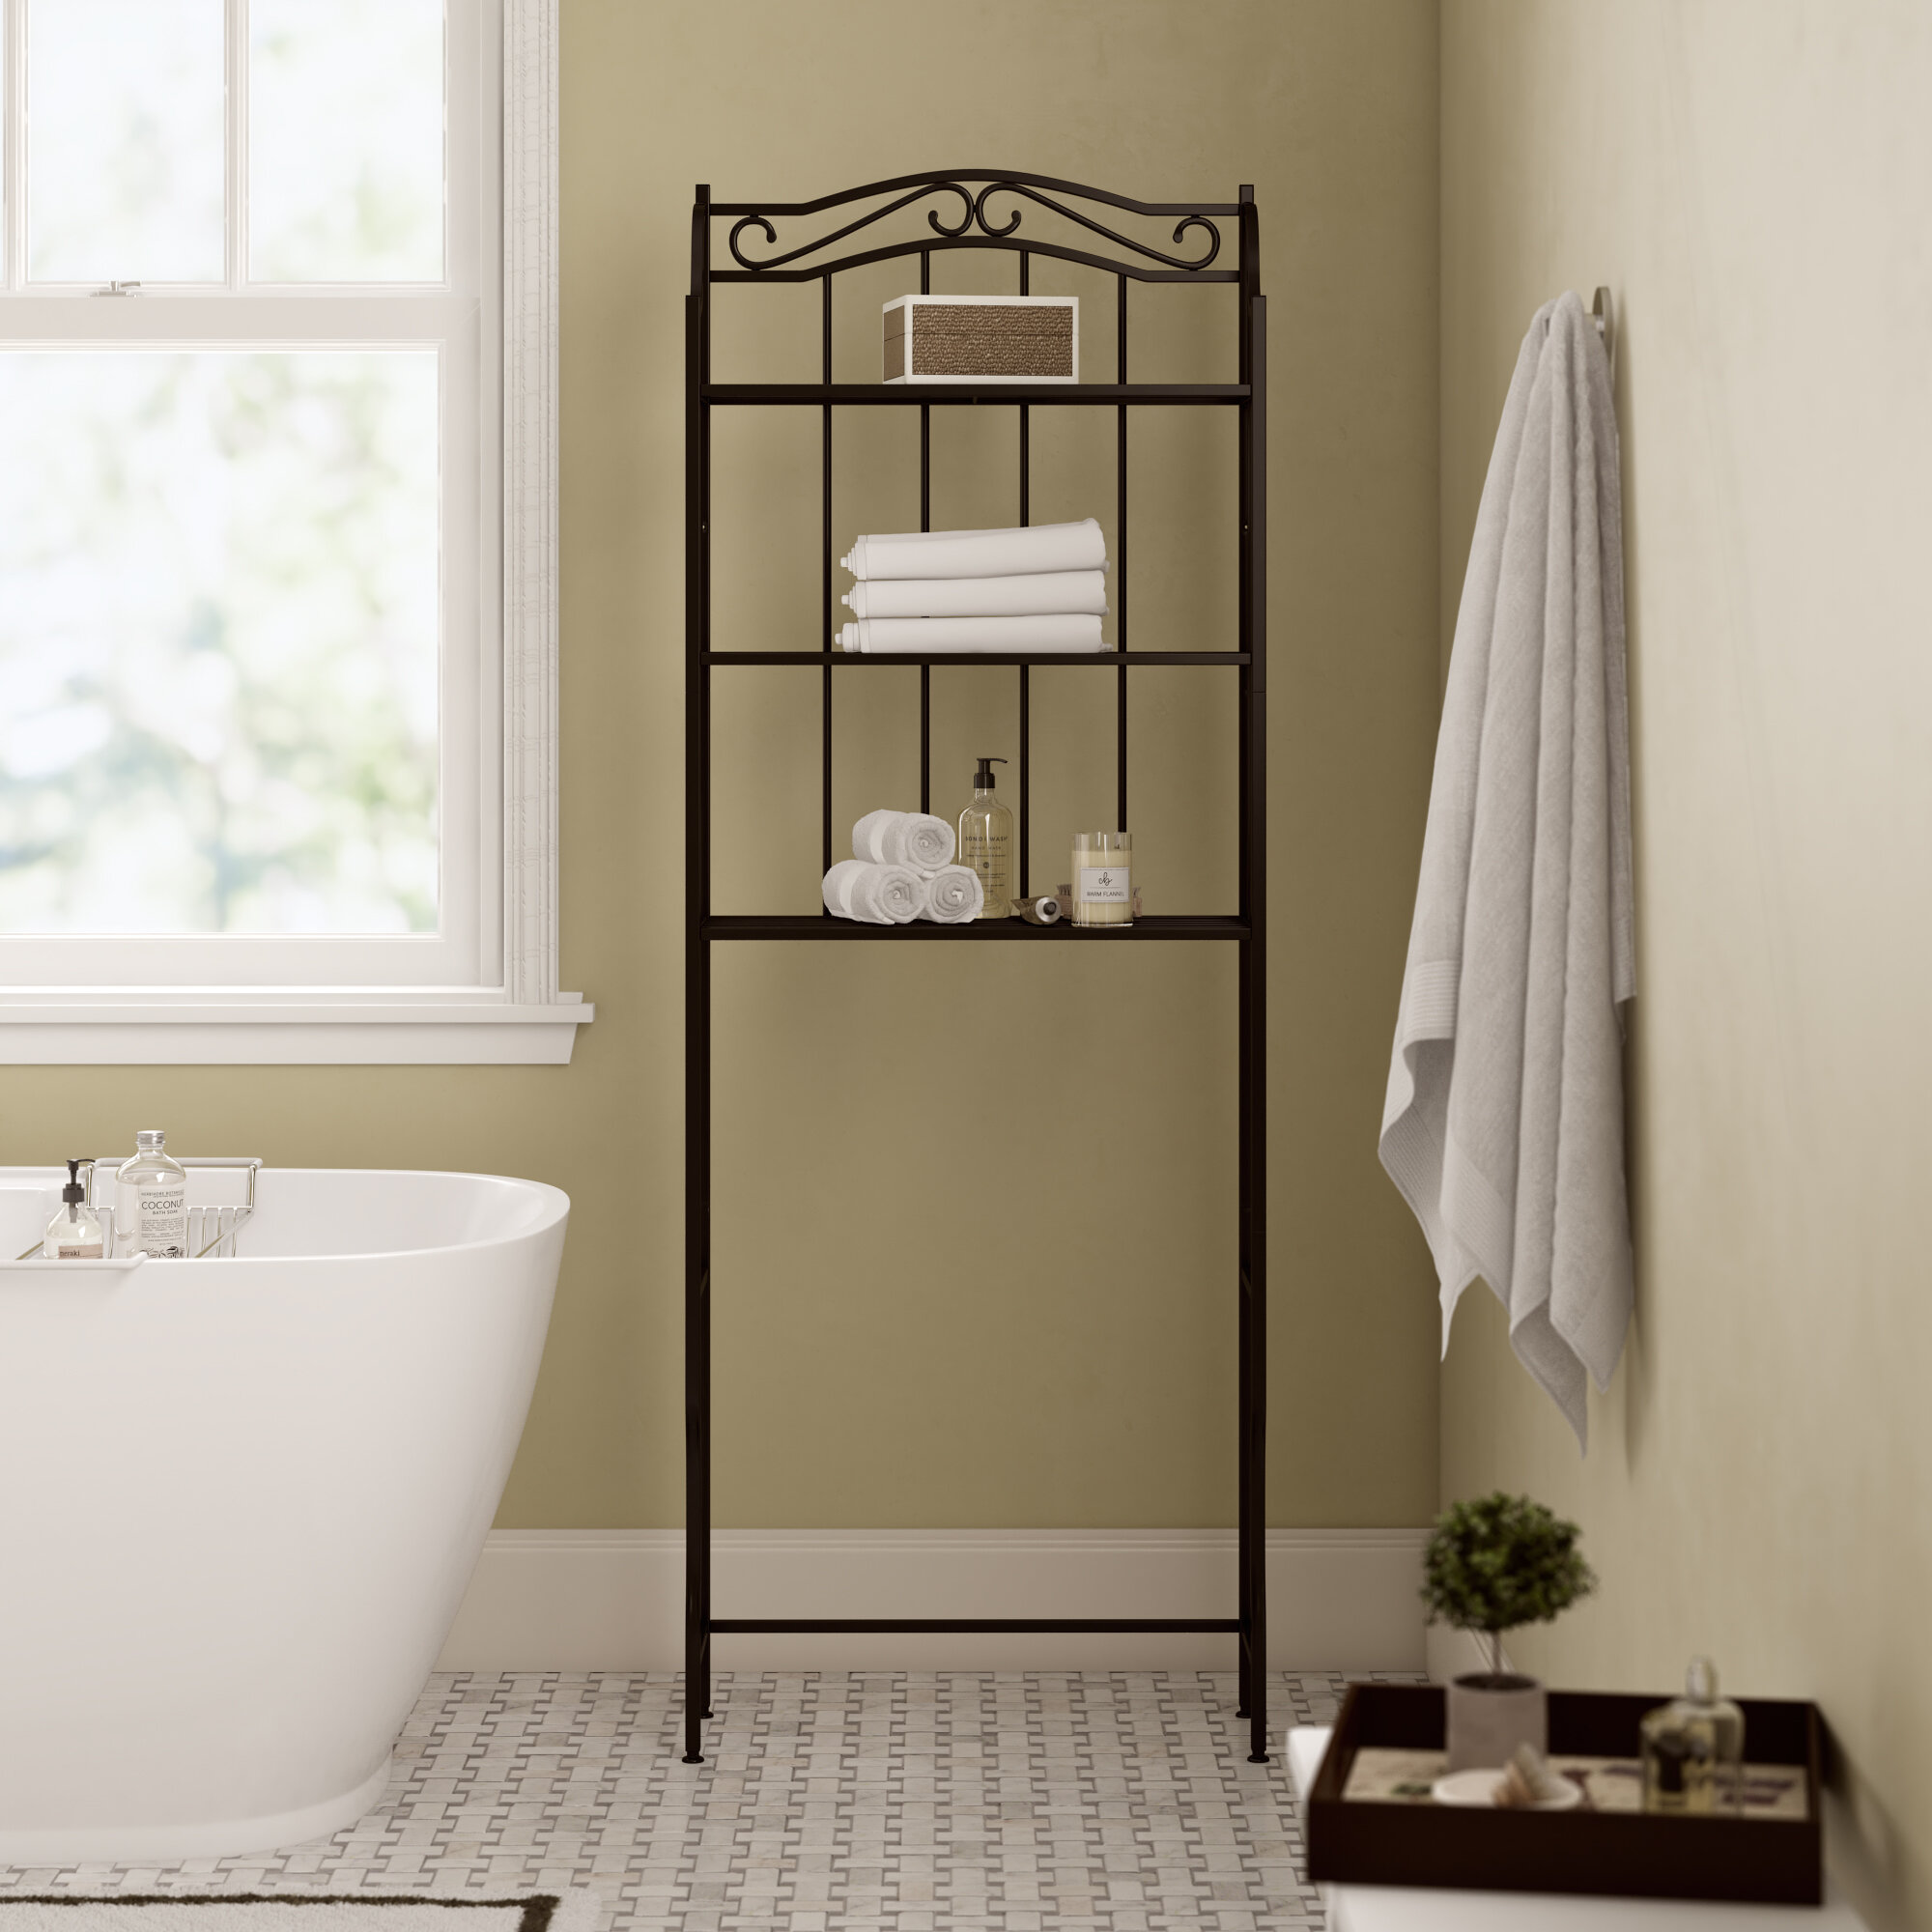 Household Essentials Faux Concrete 8055-1 Over The Toilet Space Saving Metal Shelves for Bathroom